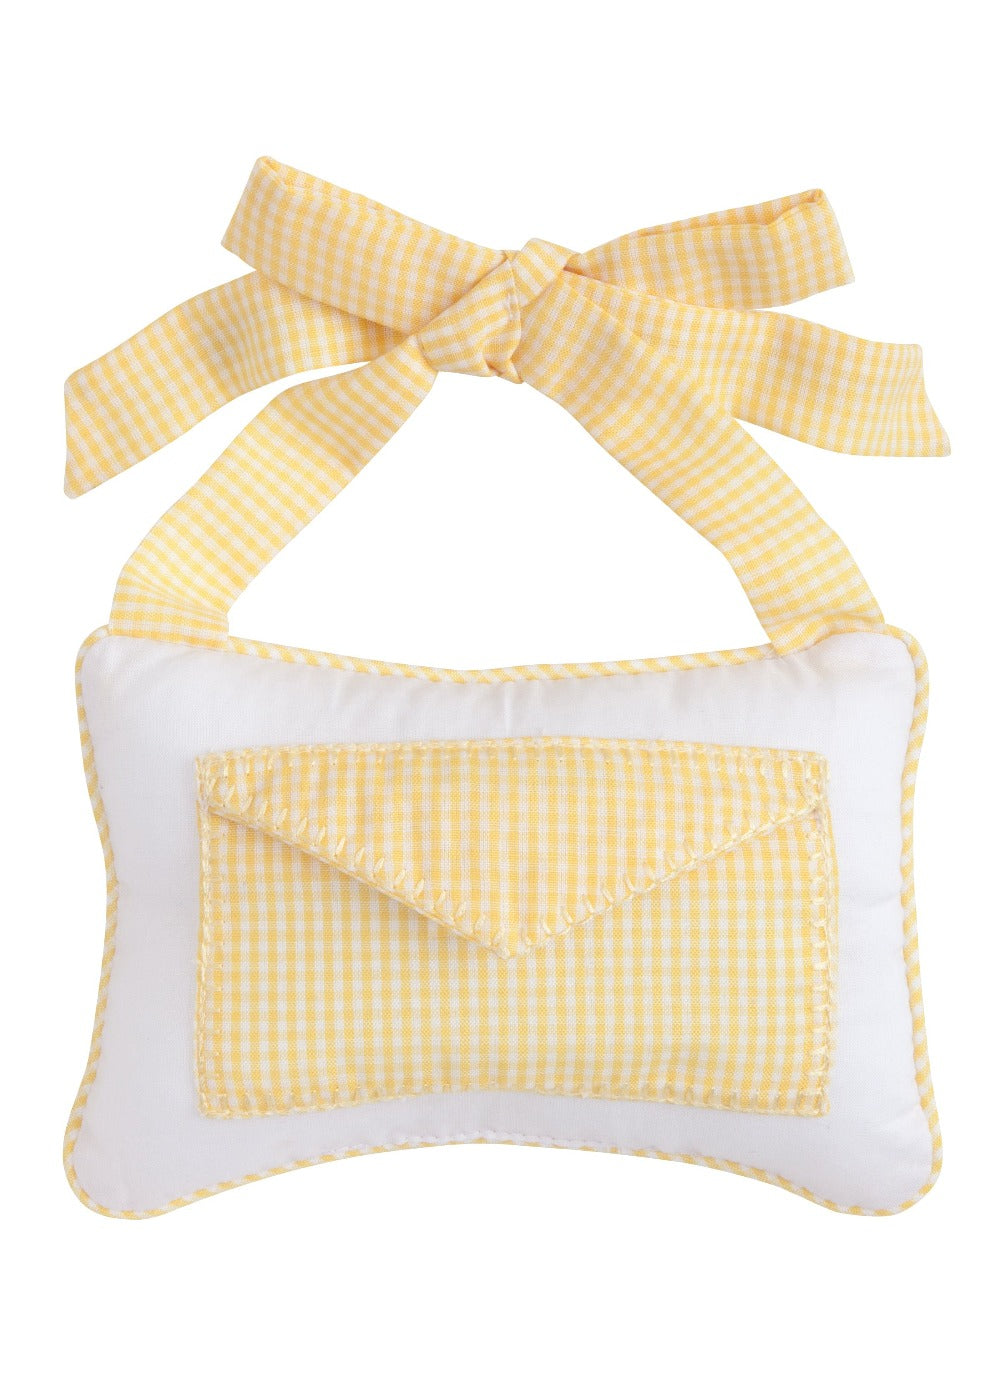 seguridadindustrialcr gift card holder, classic door pillow with pocket in yellow, gender neutral baby gift